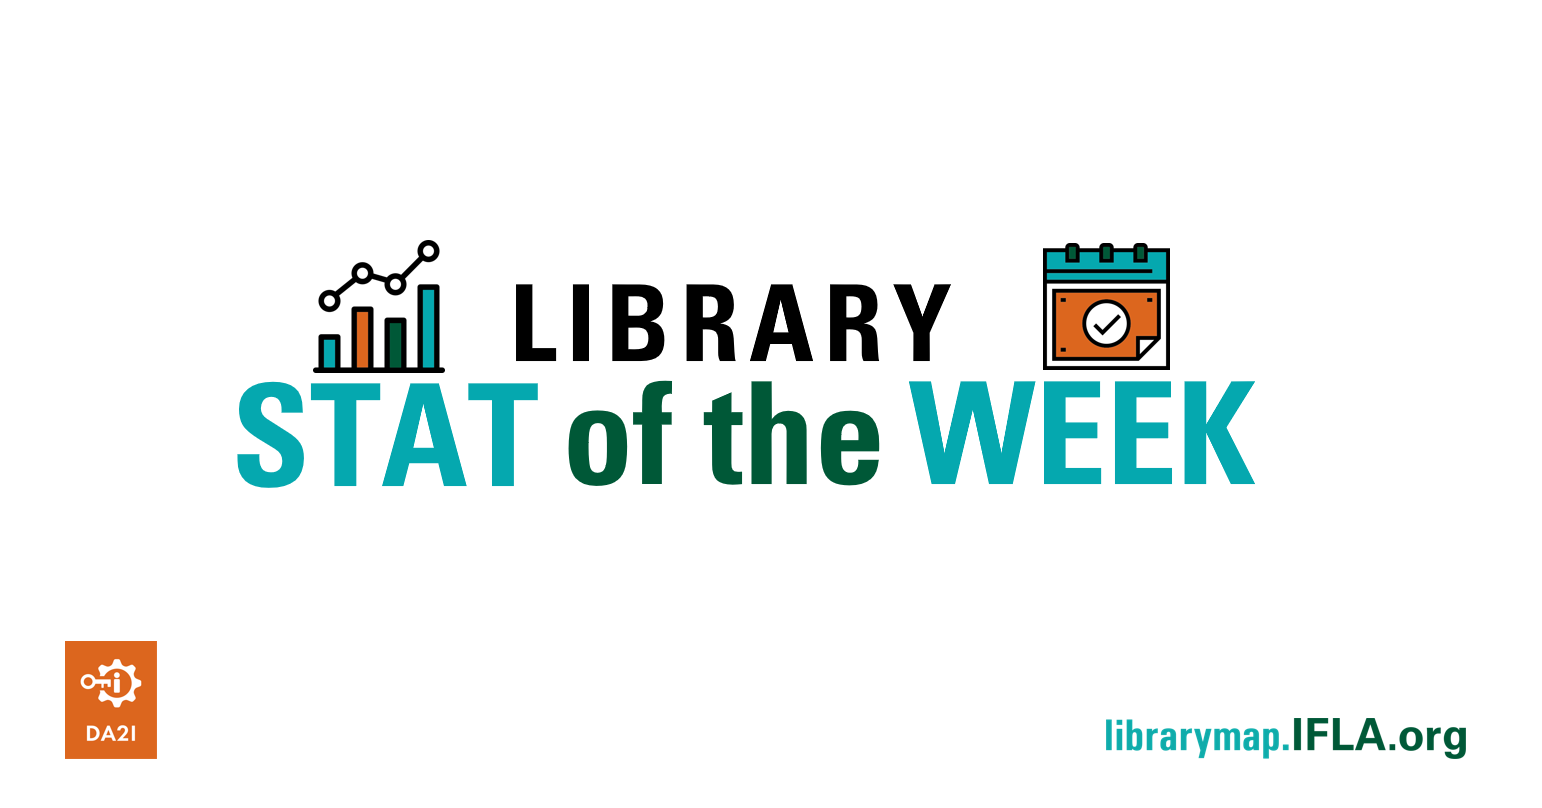 Image for Library Stat of the Week. Text: Library Stat of the Week. Images: a graph and a calendar. Logos: DA2I and Library Map of the World